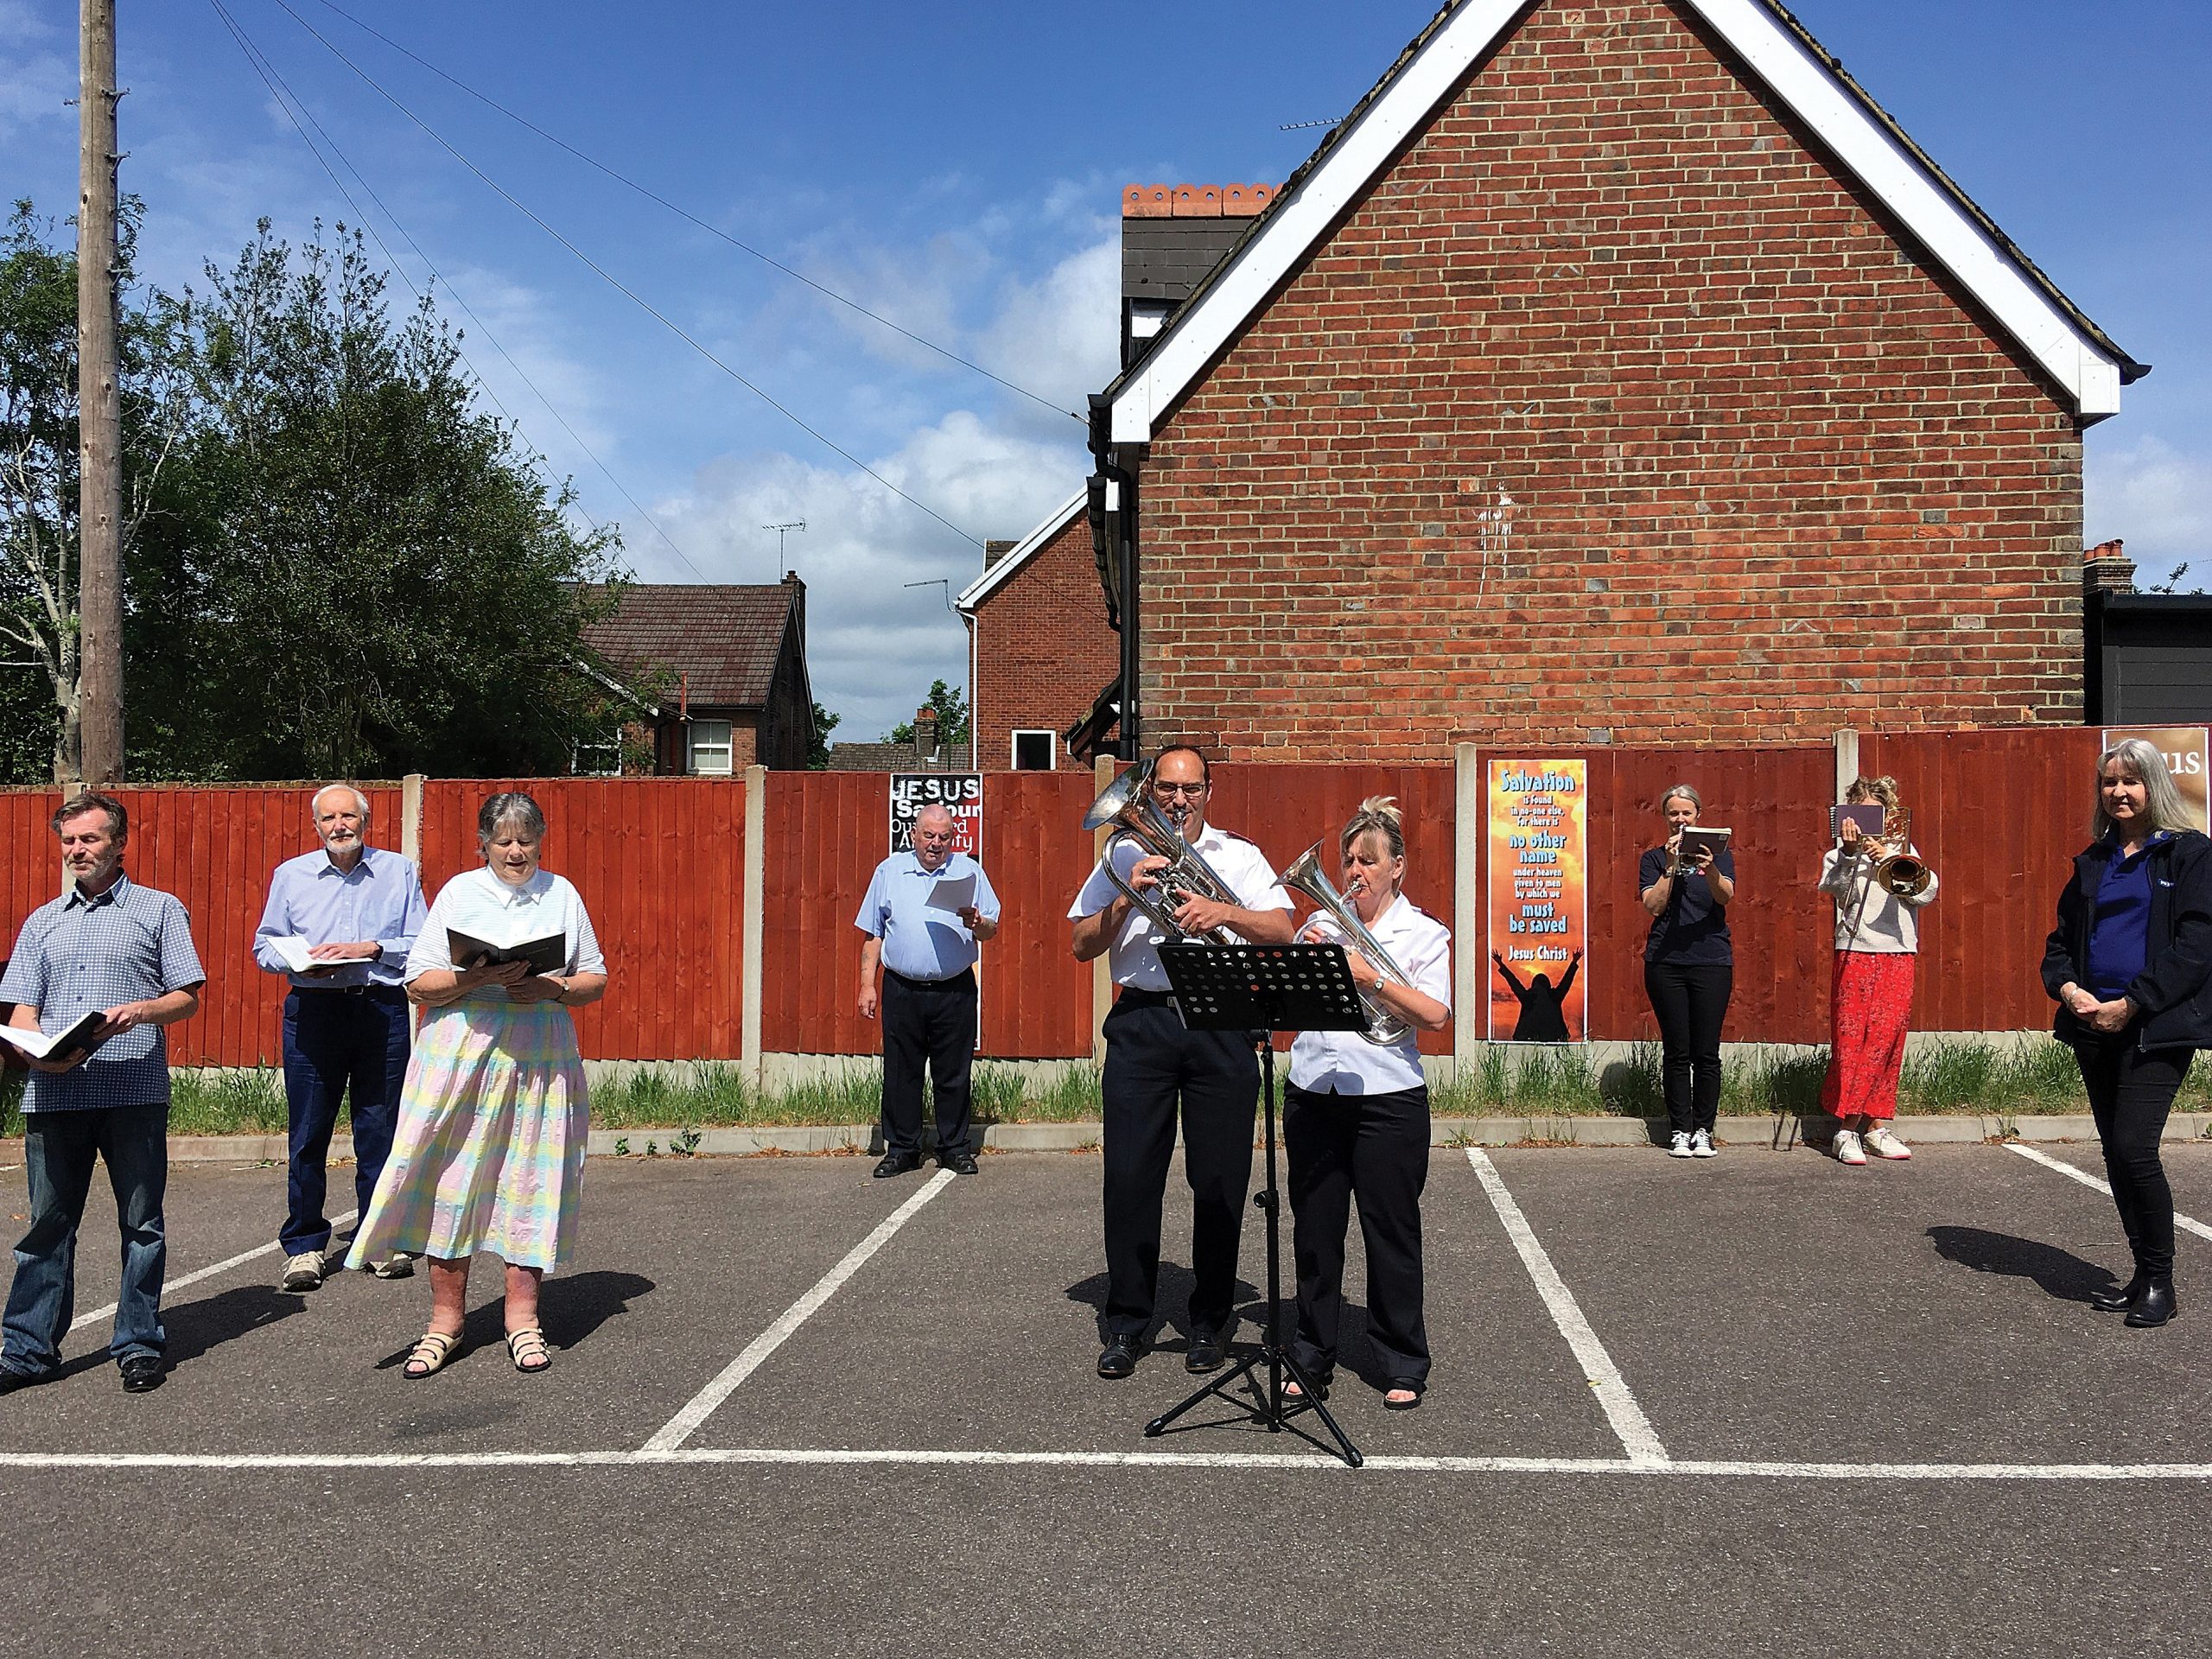 Salvation Army play hymns in the car park